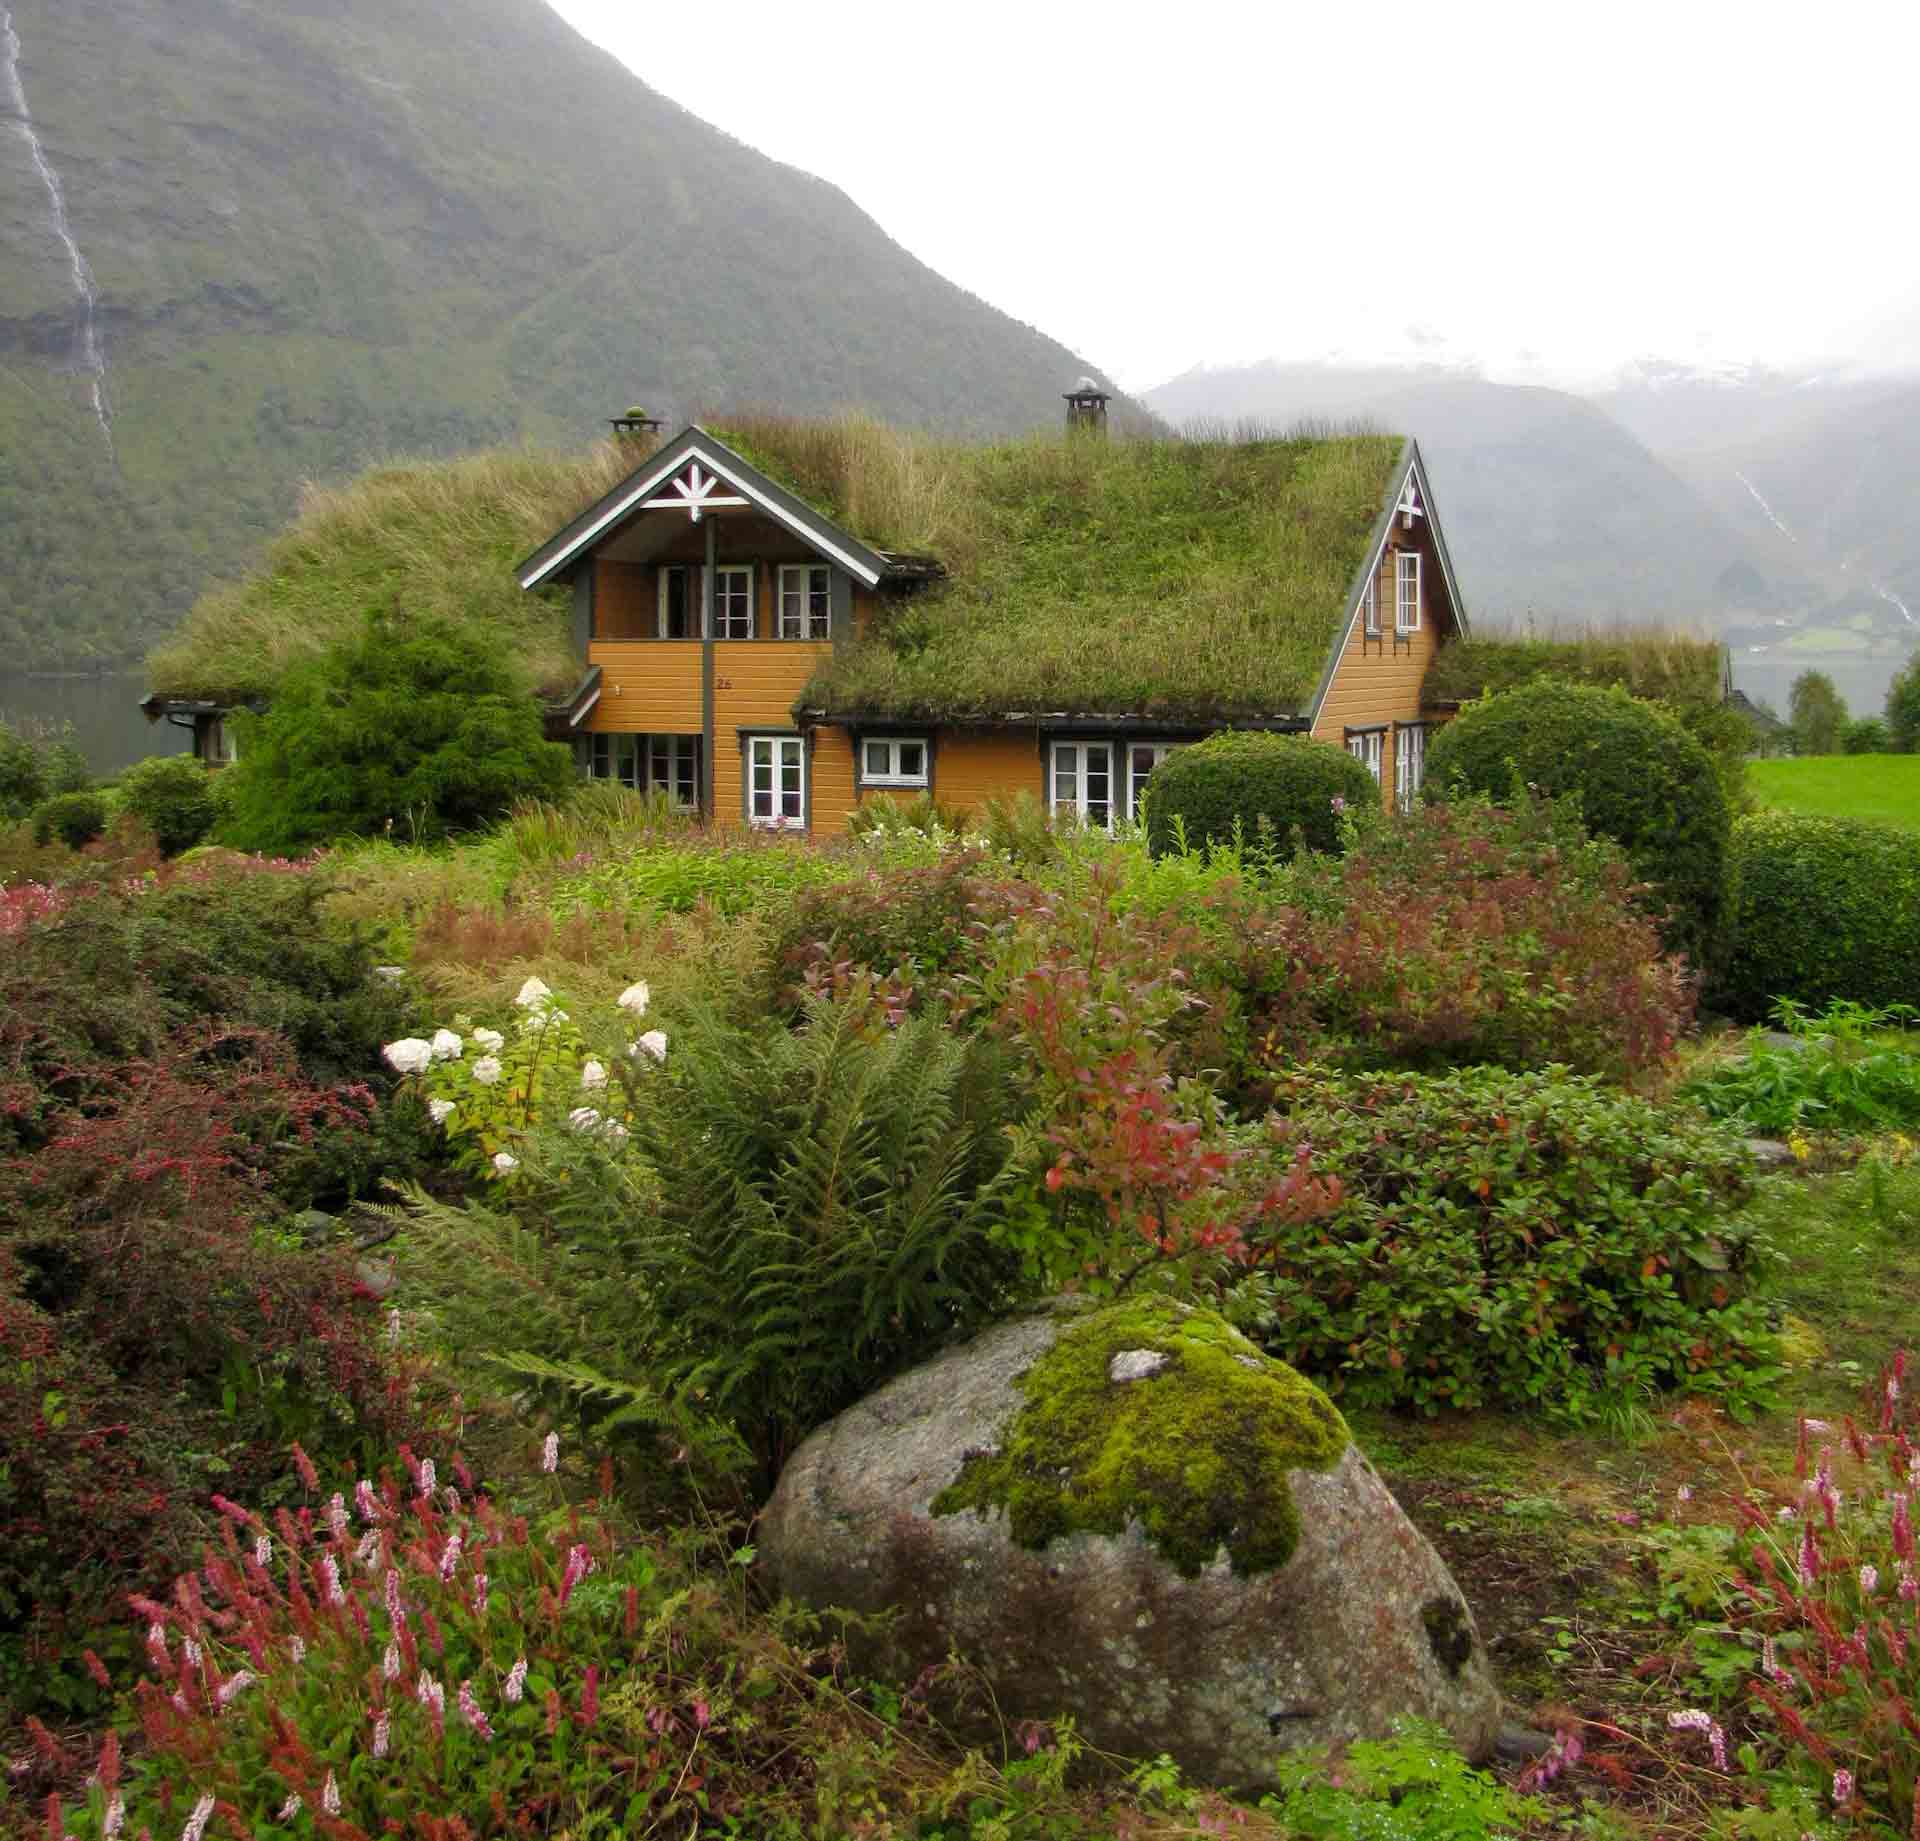 House with grass roof near mountains